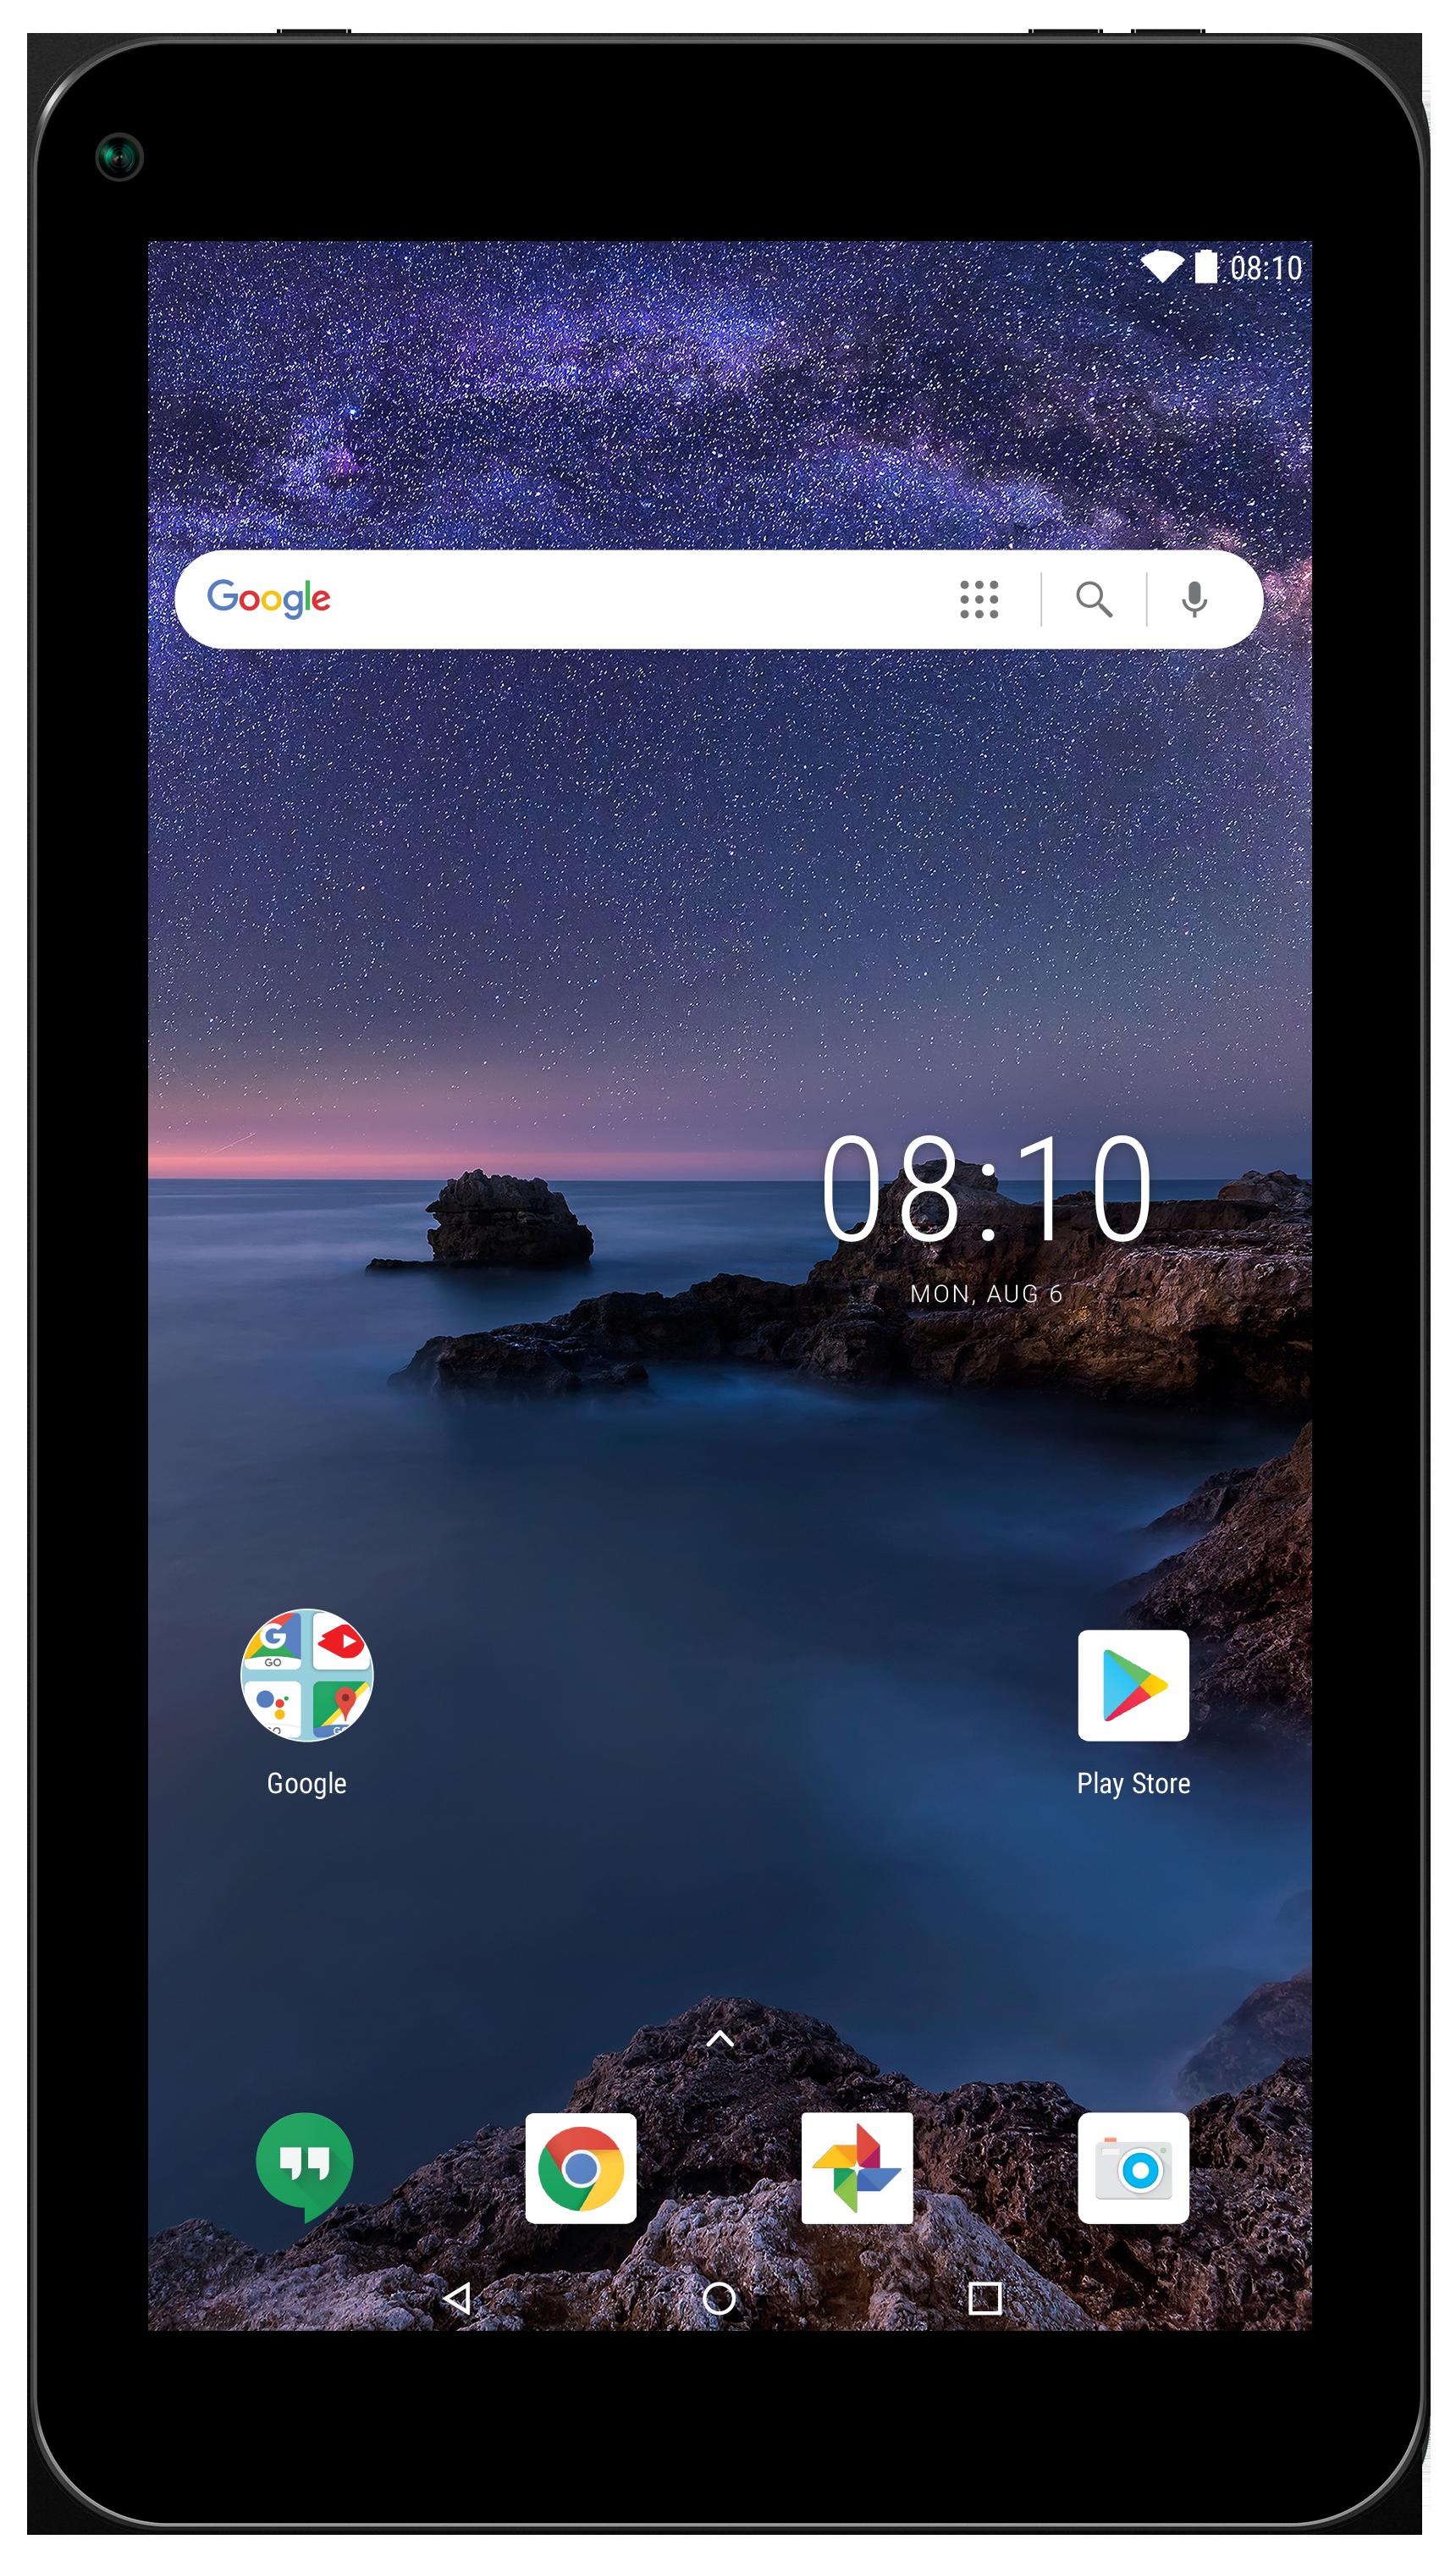 Smartab 7" 16GB Tablet Android OS - Black - ST7150 - image 1 of 5